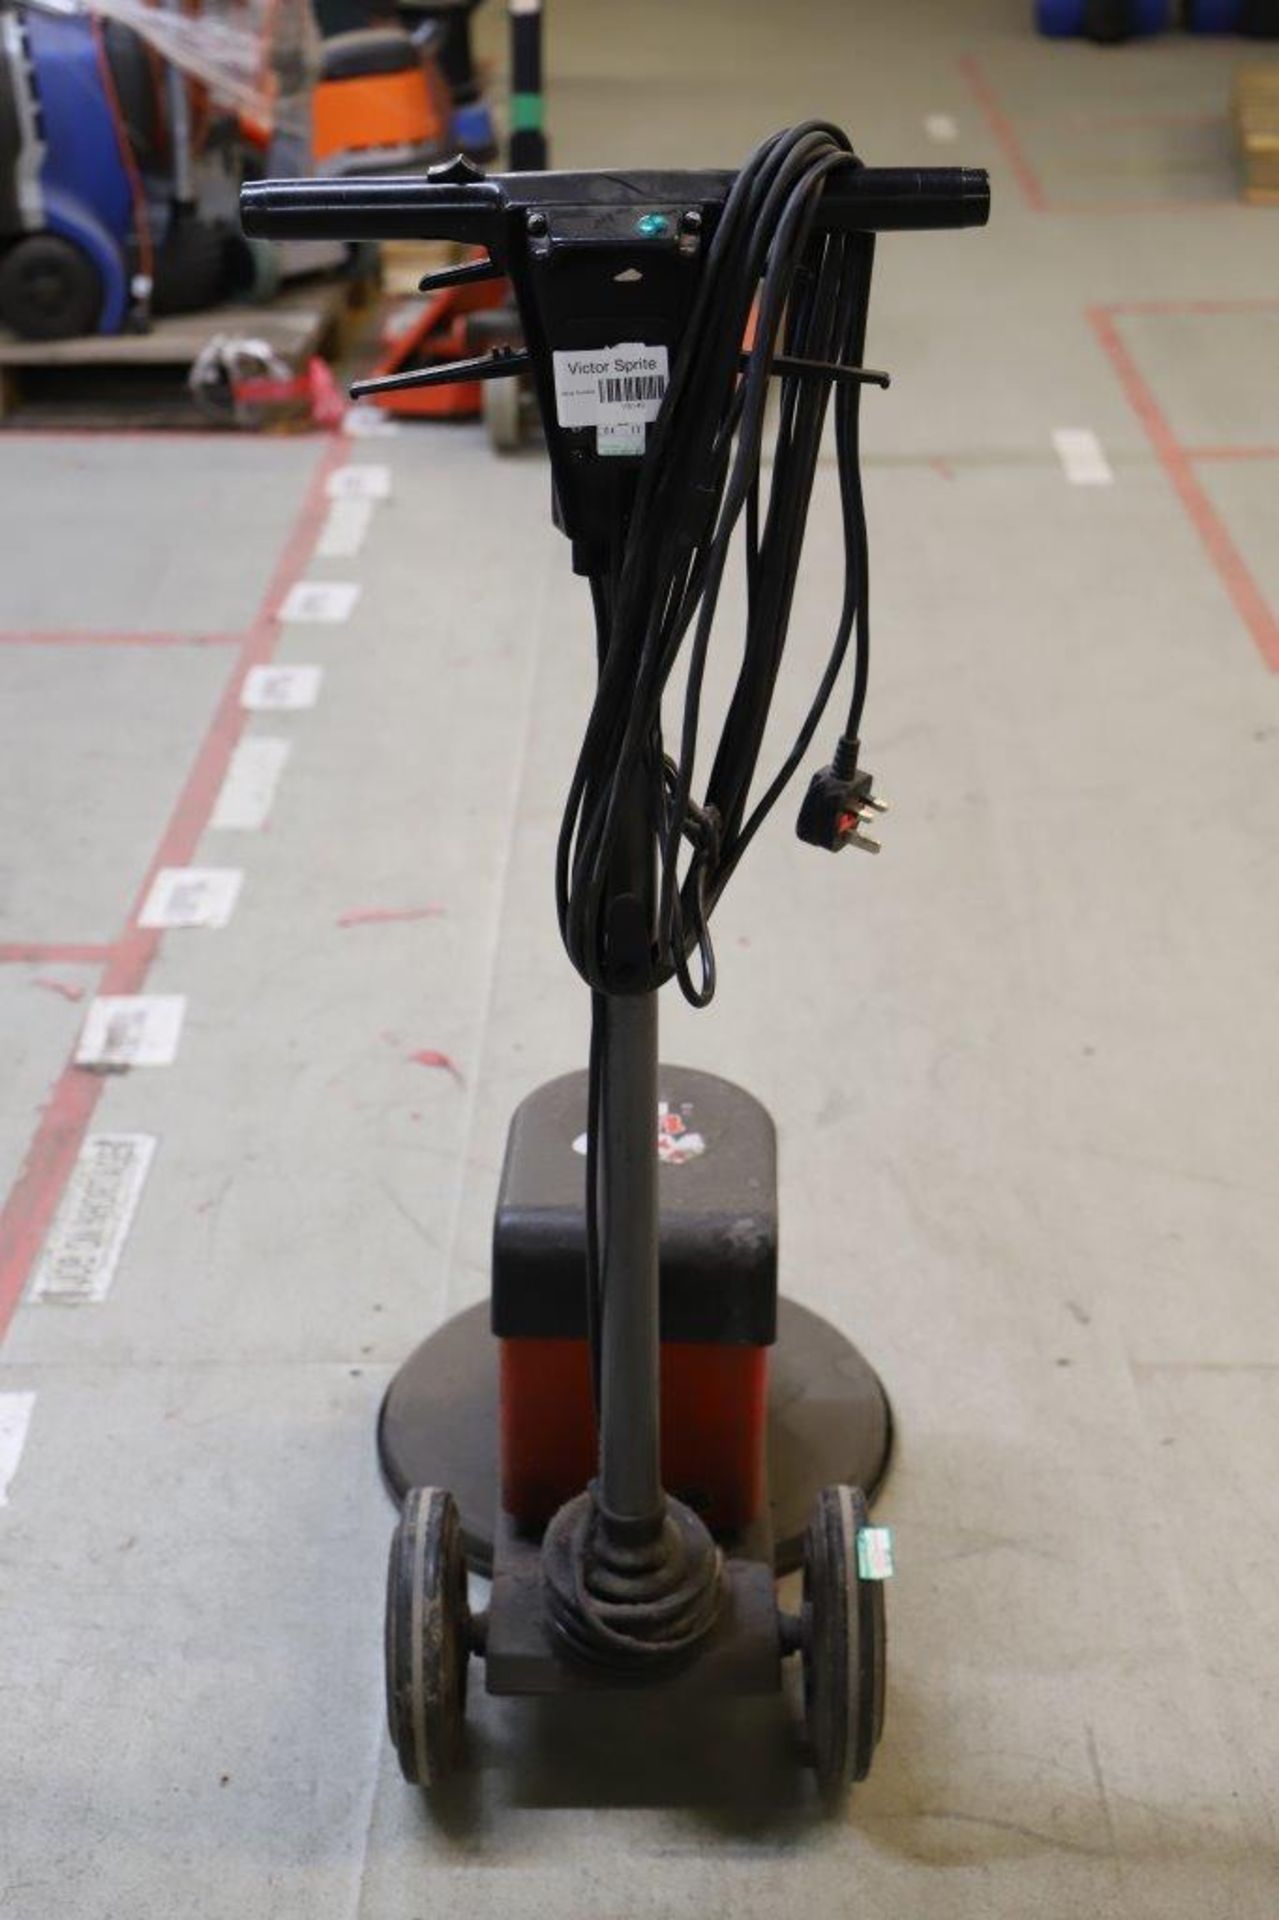 PAT tested Industrial cleaning machines, includes: HV380 BUFFER, TRUVOX, VICTOR SPRITE.